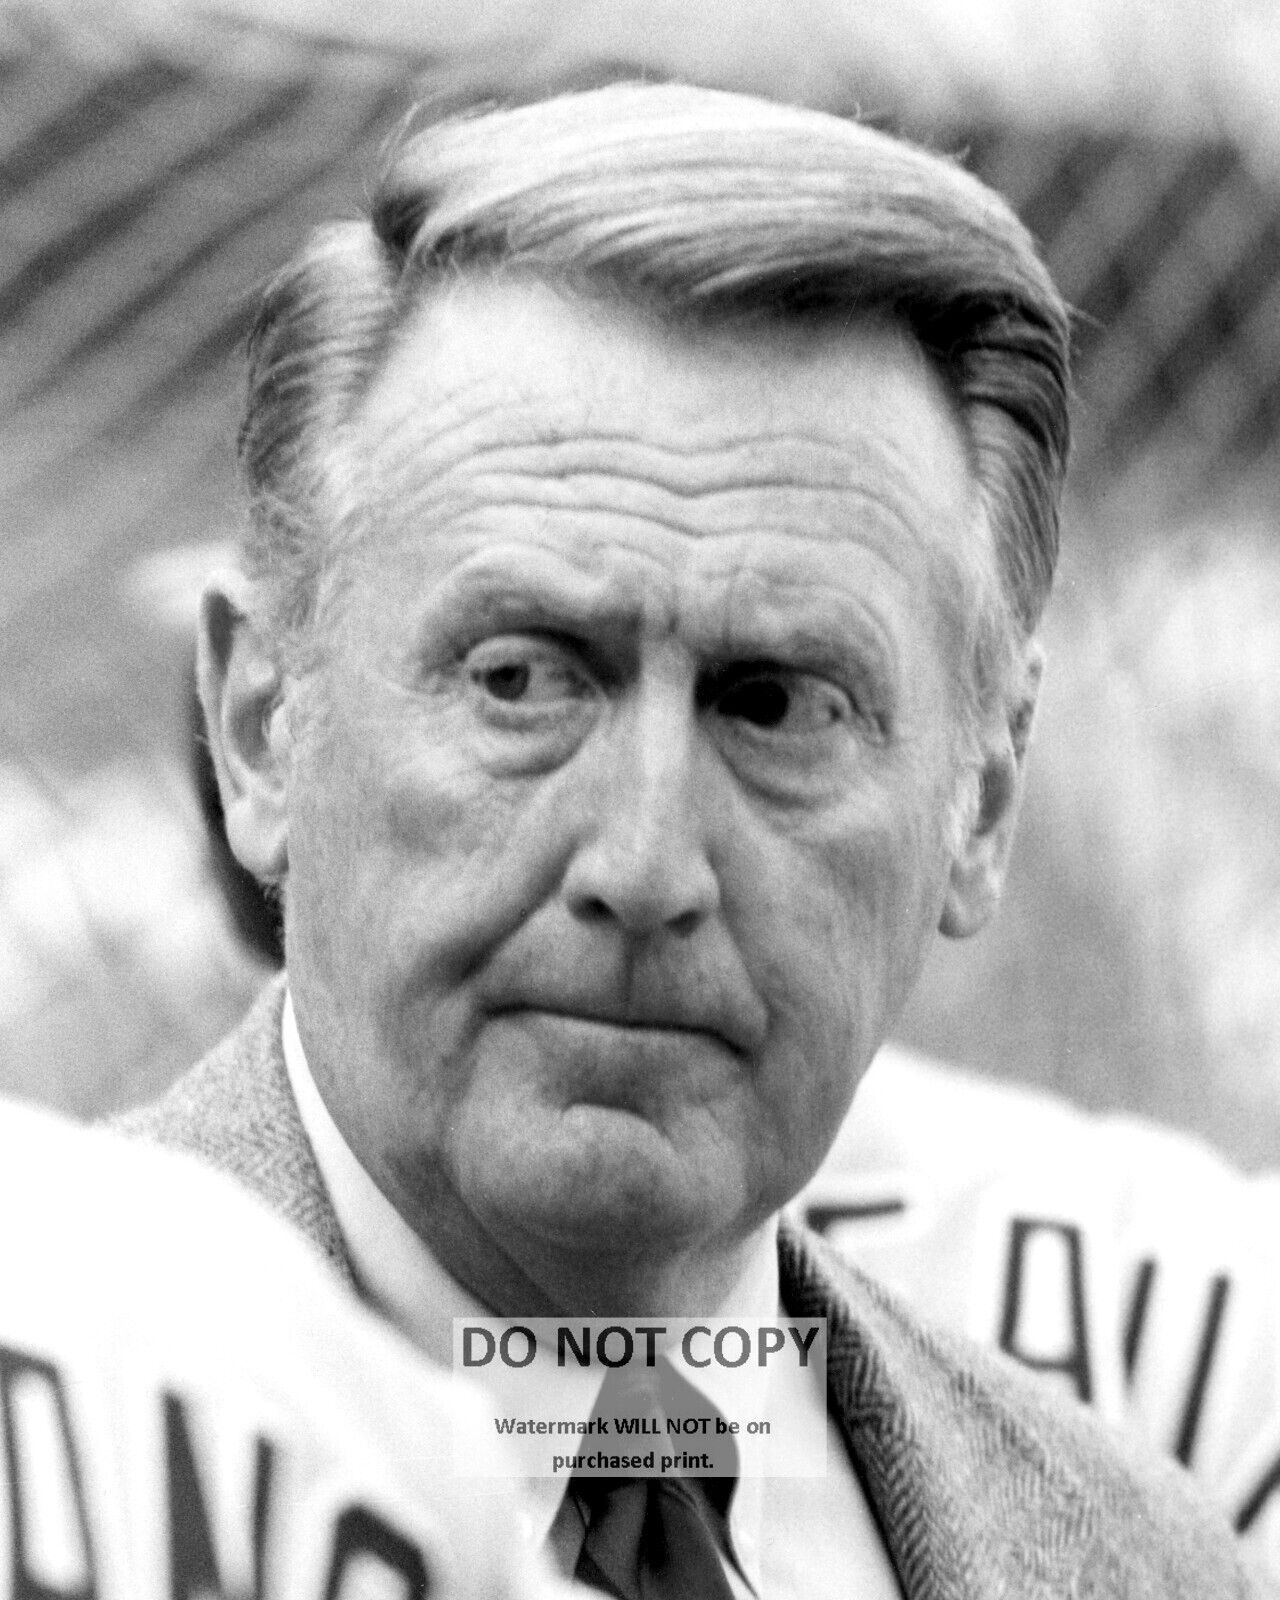 VIN SCULLY LEGENDARY LOS ANGELES BROOKLYN DODGERS ANNOUNCER 8X10 PHOTO (BB-345)